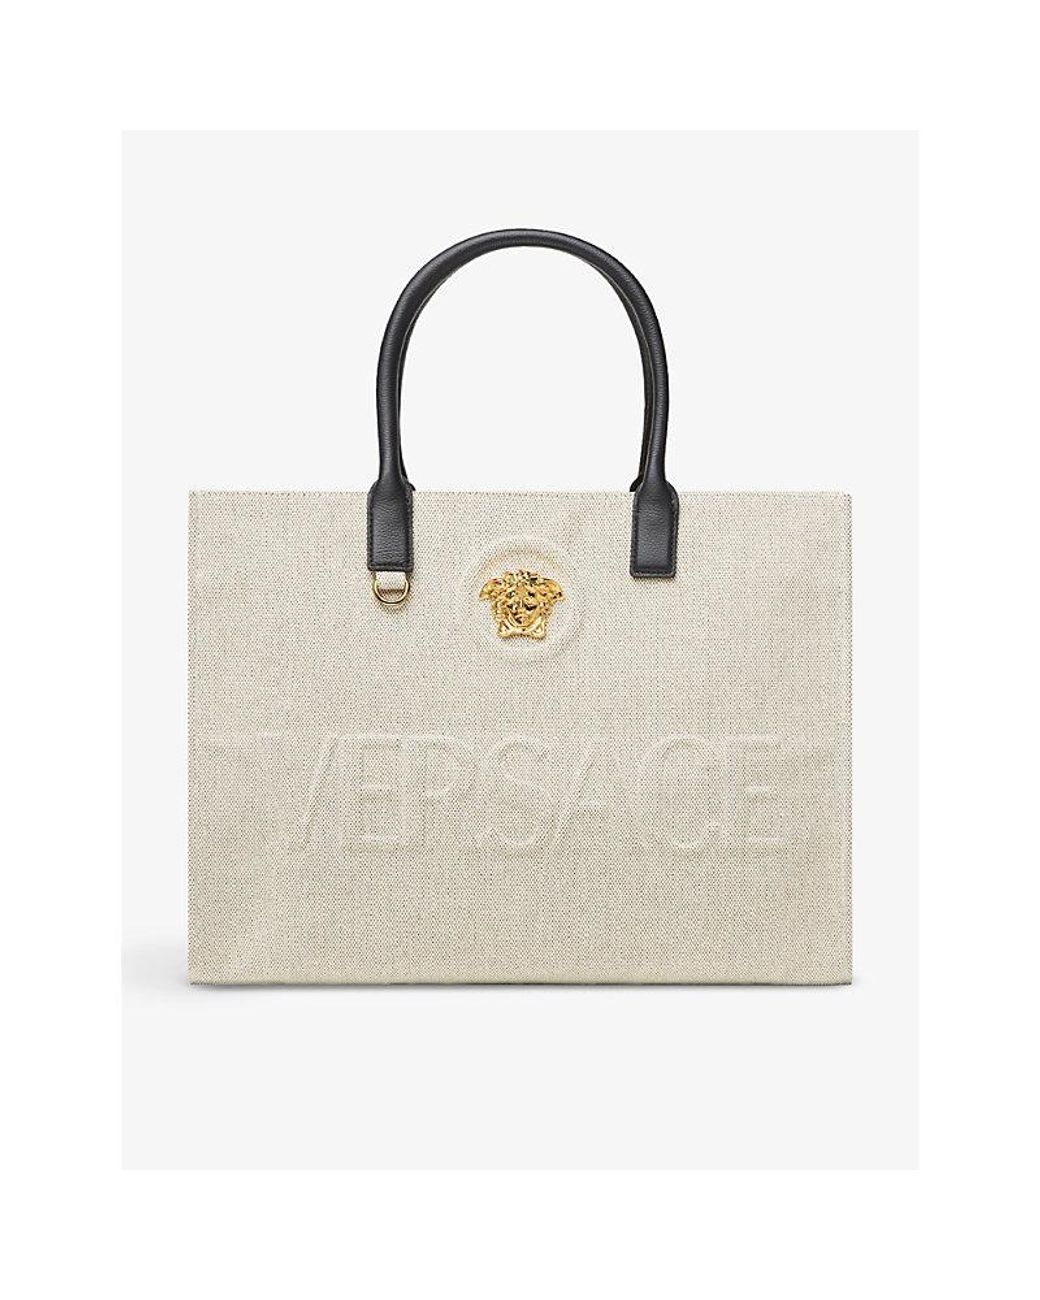 Versace Large Versace Allover Tote Bag - Farfetch